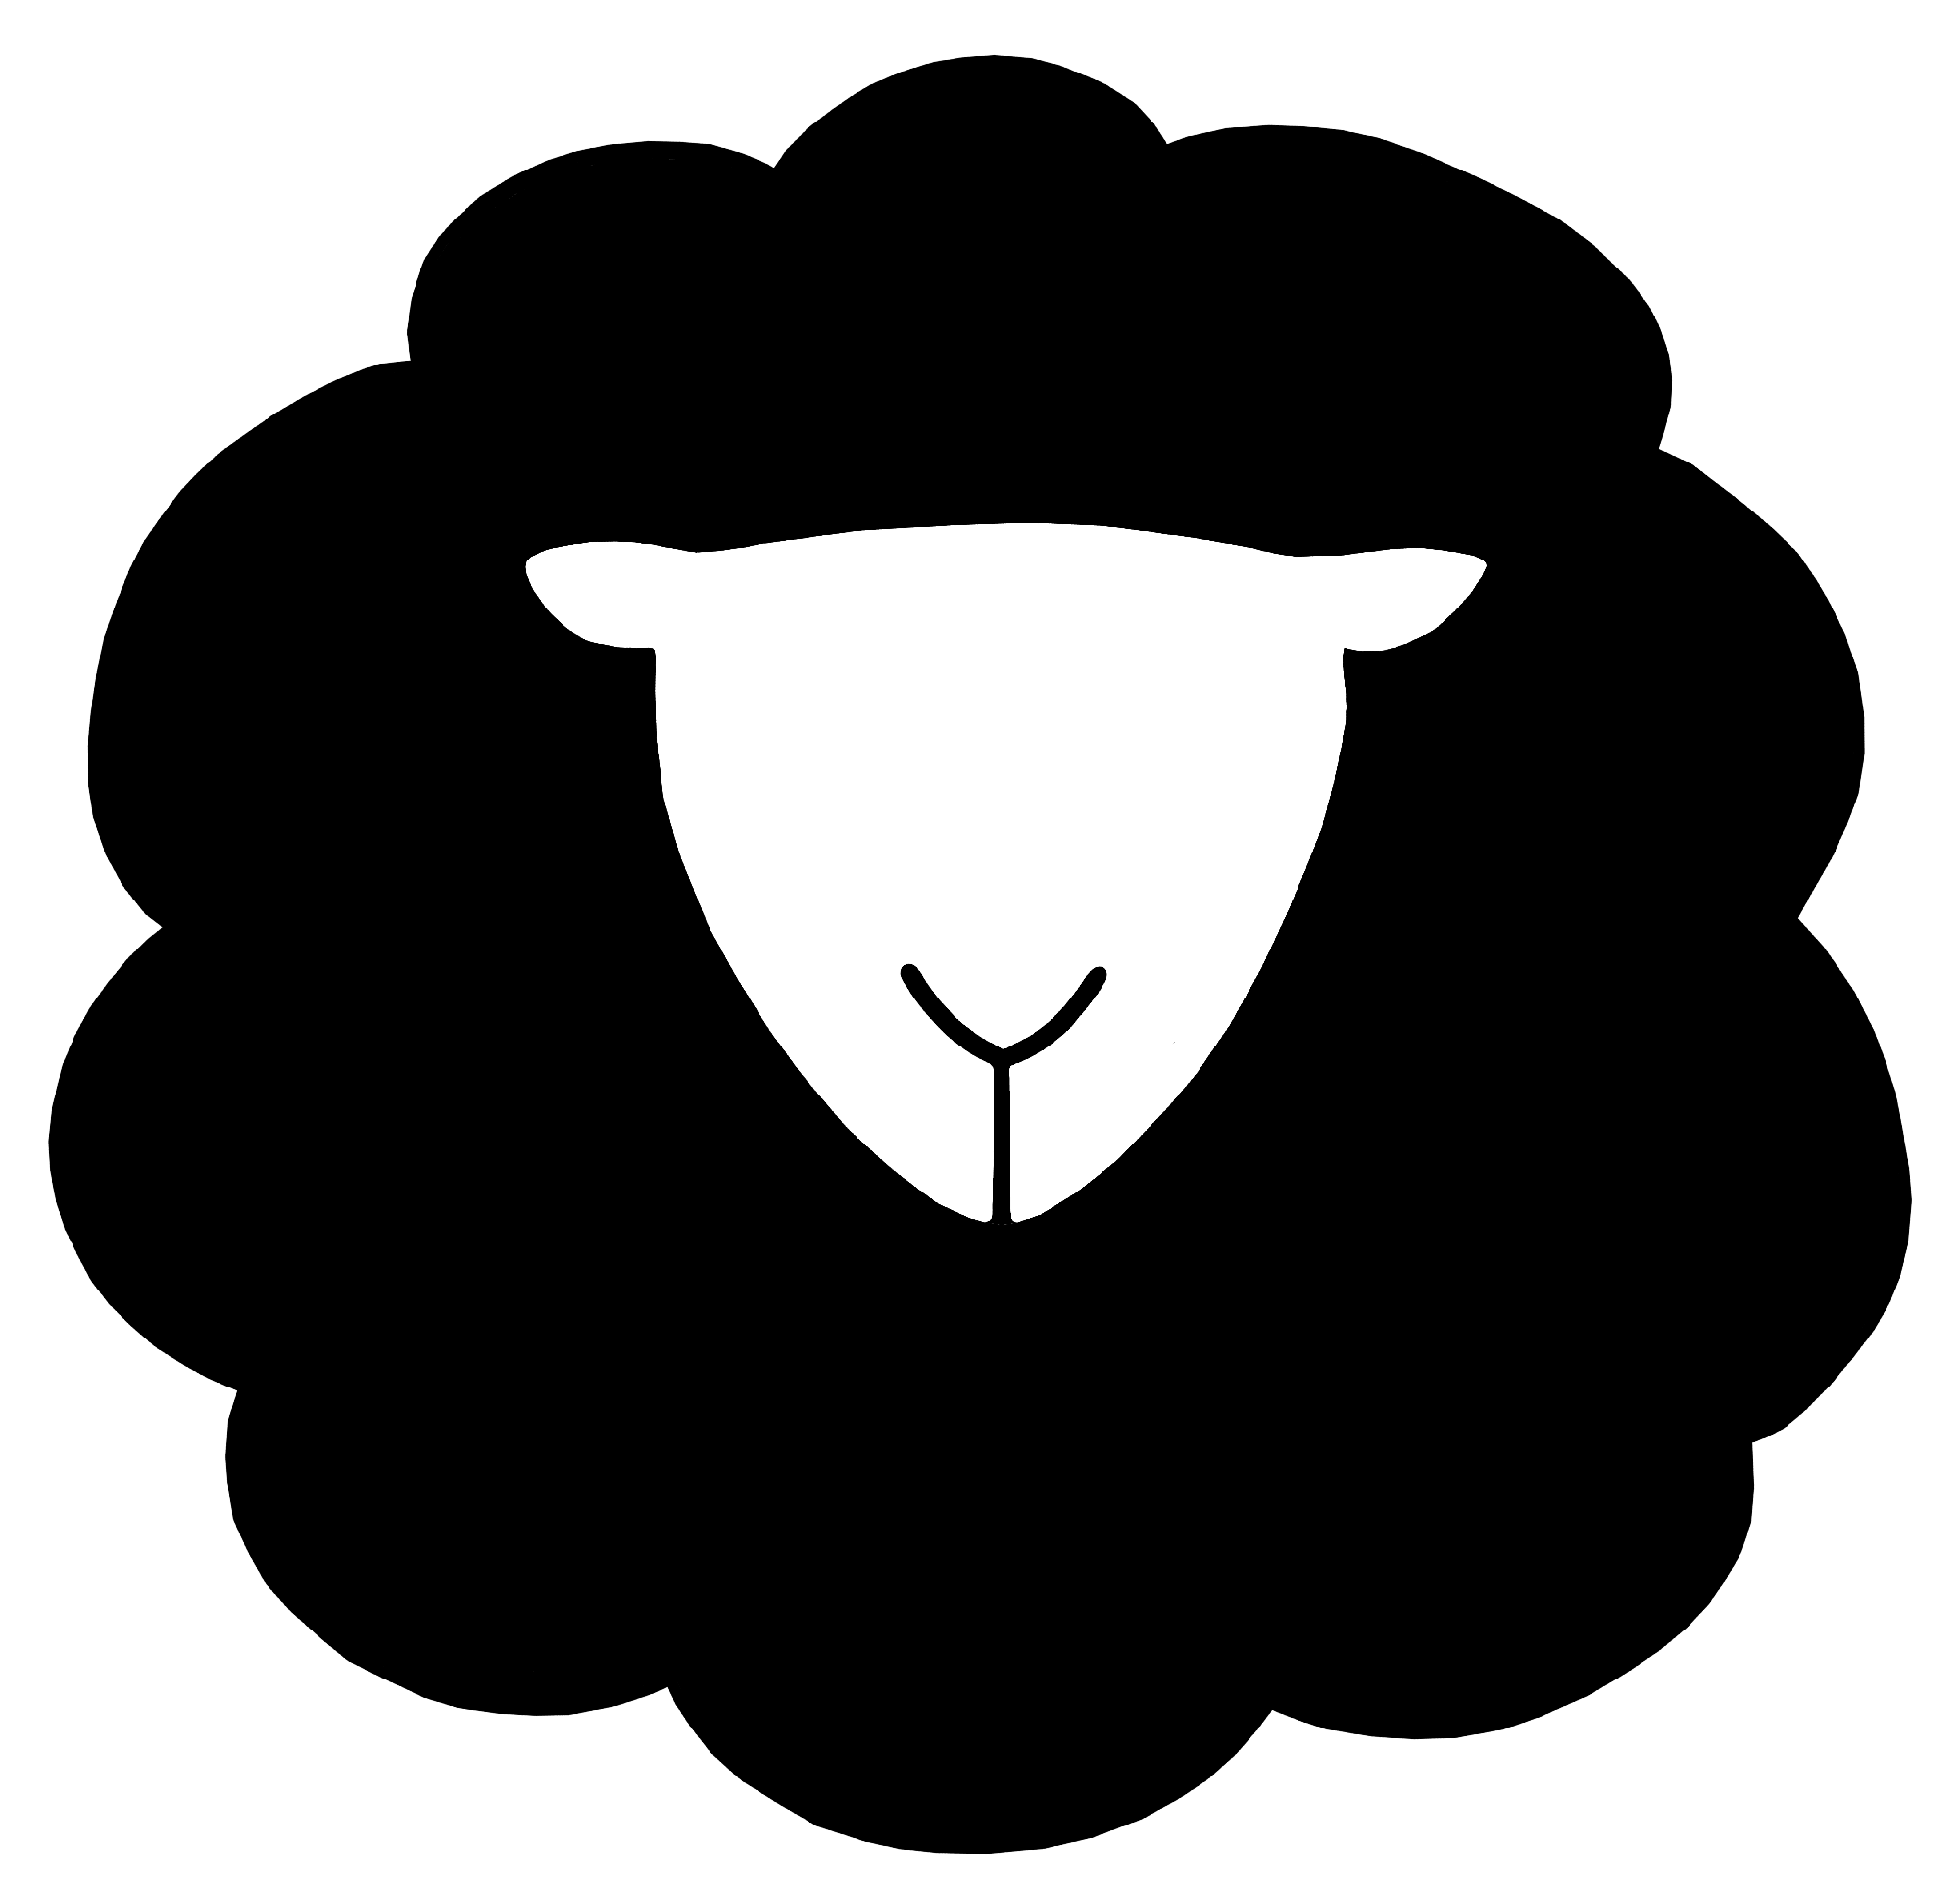 image of a small black sheep with a white head